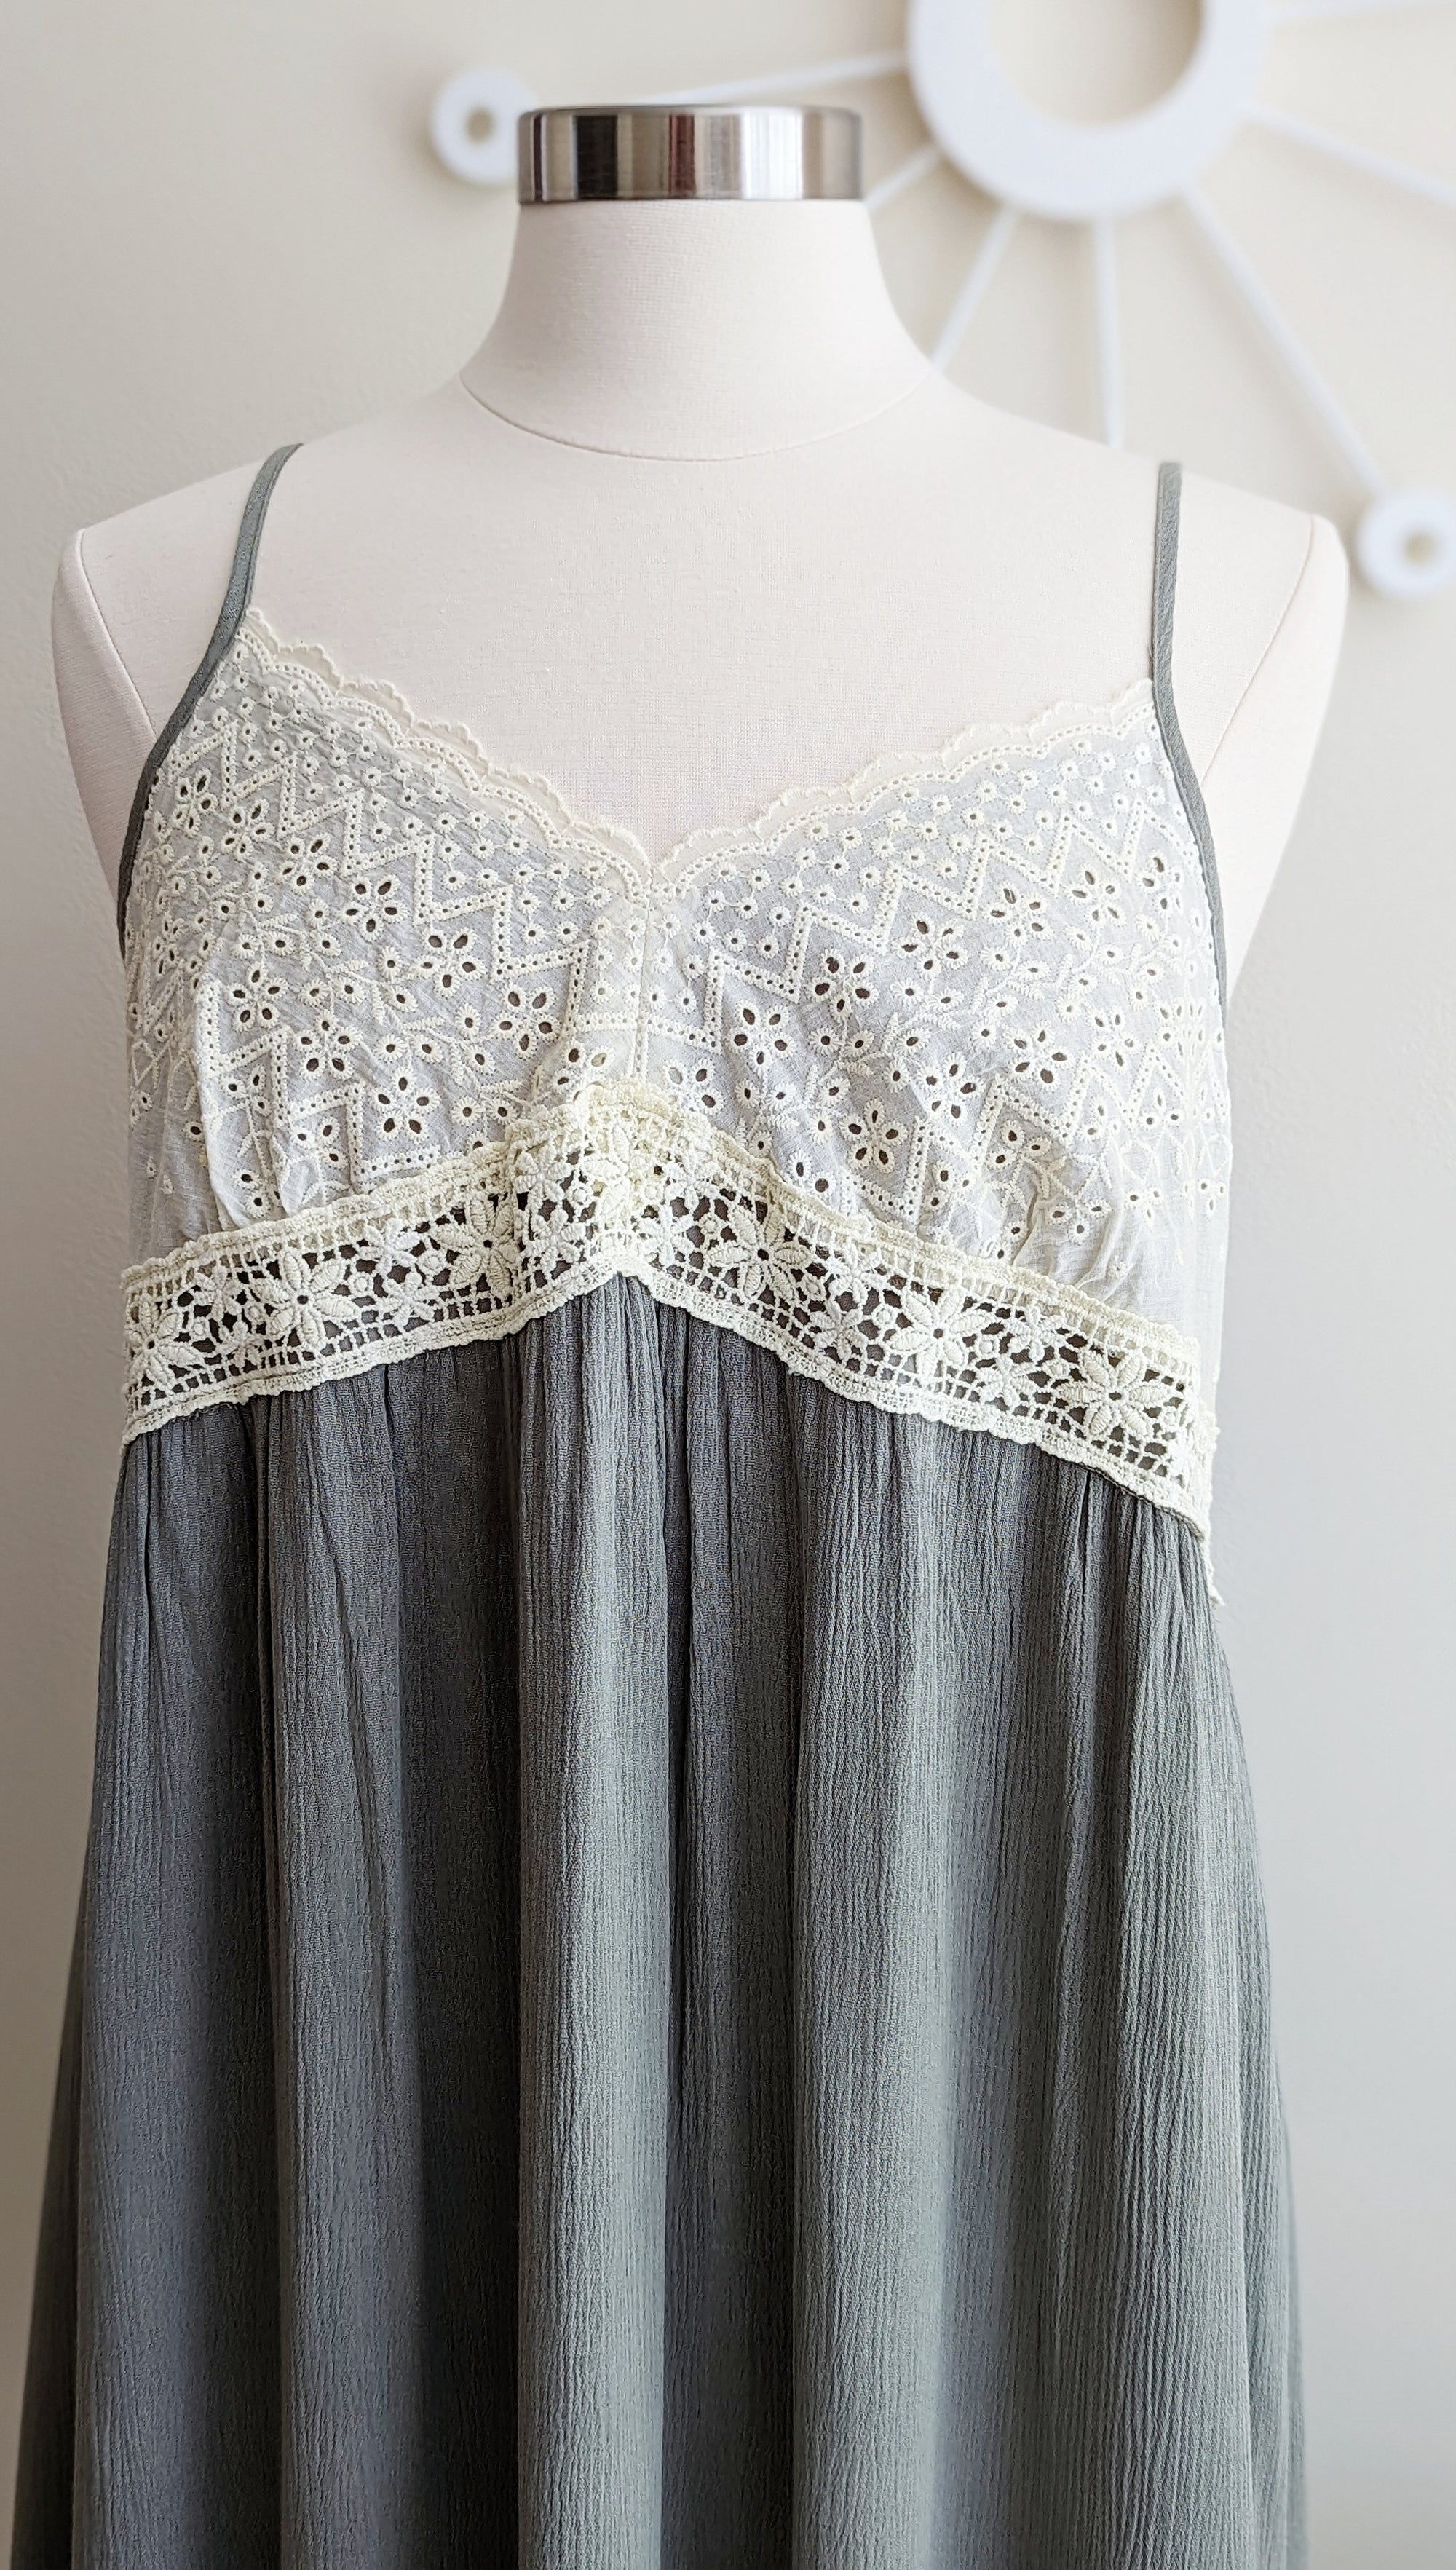 Olive Bohemian Sundress with Lace